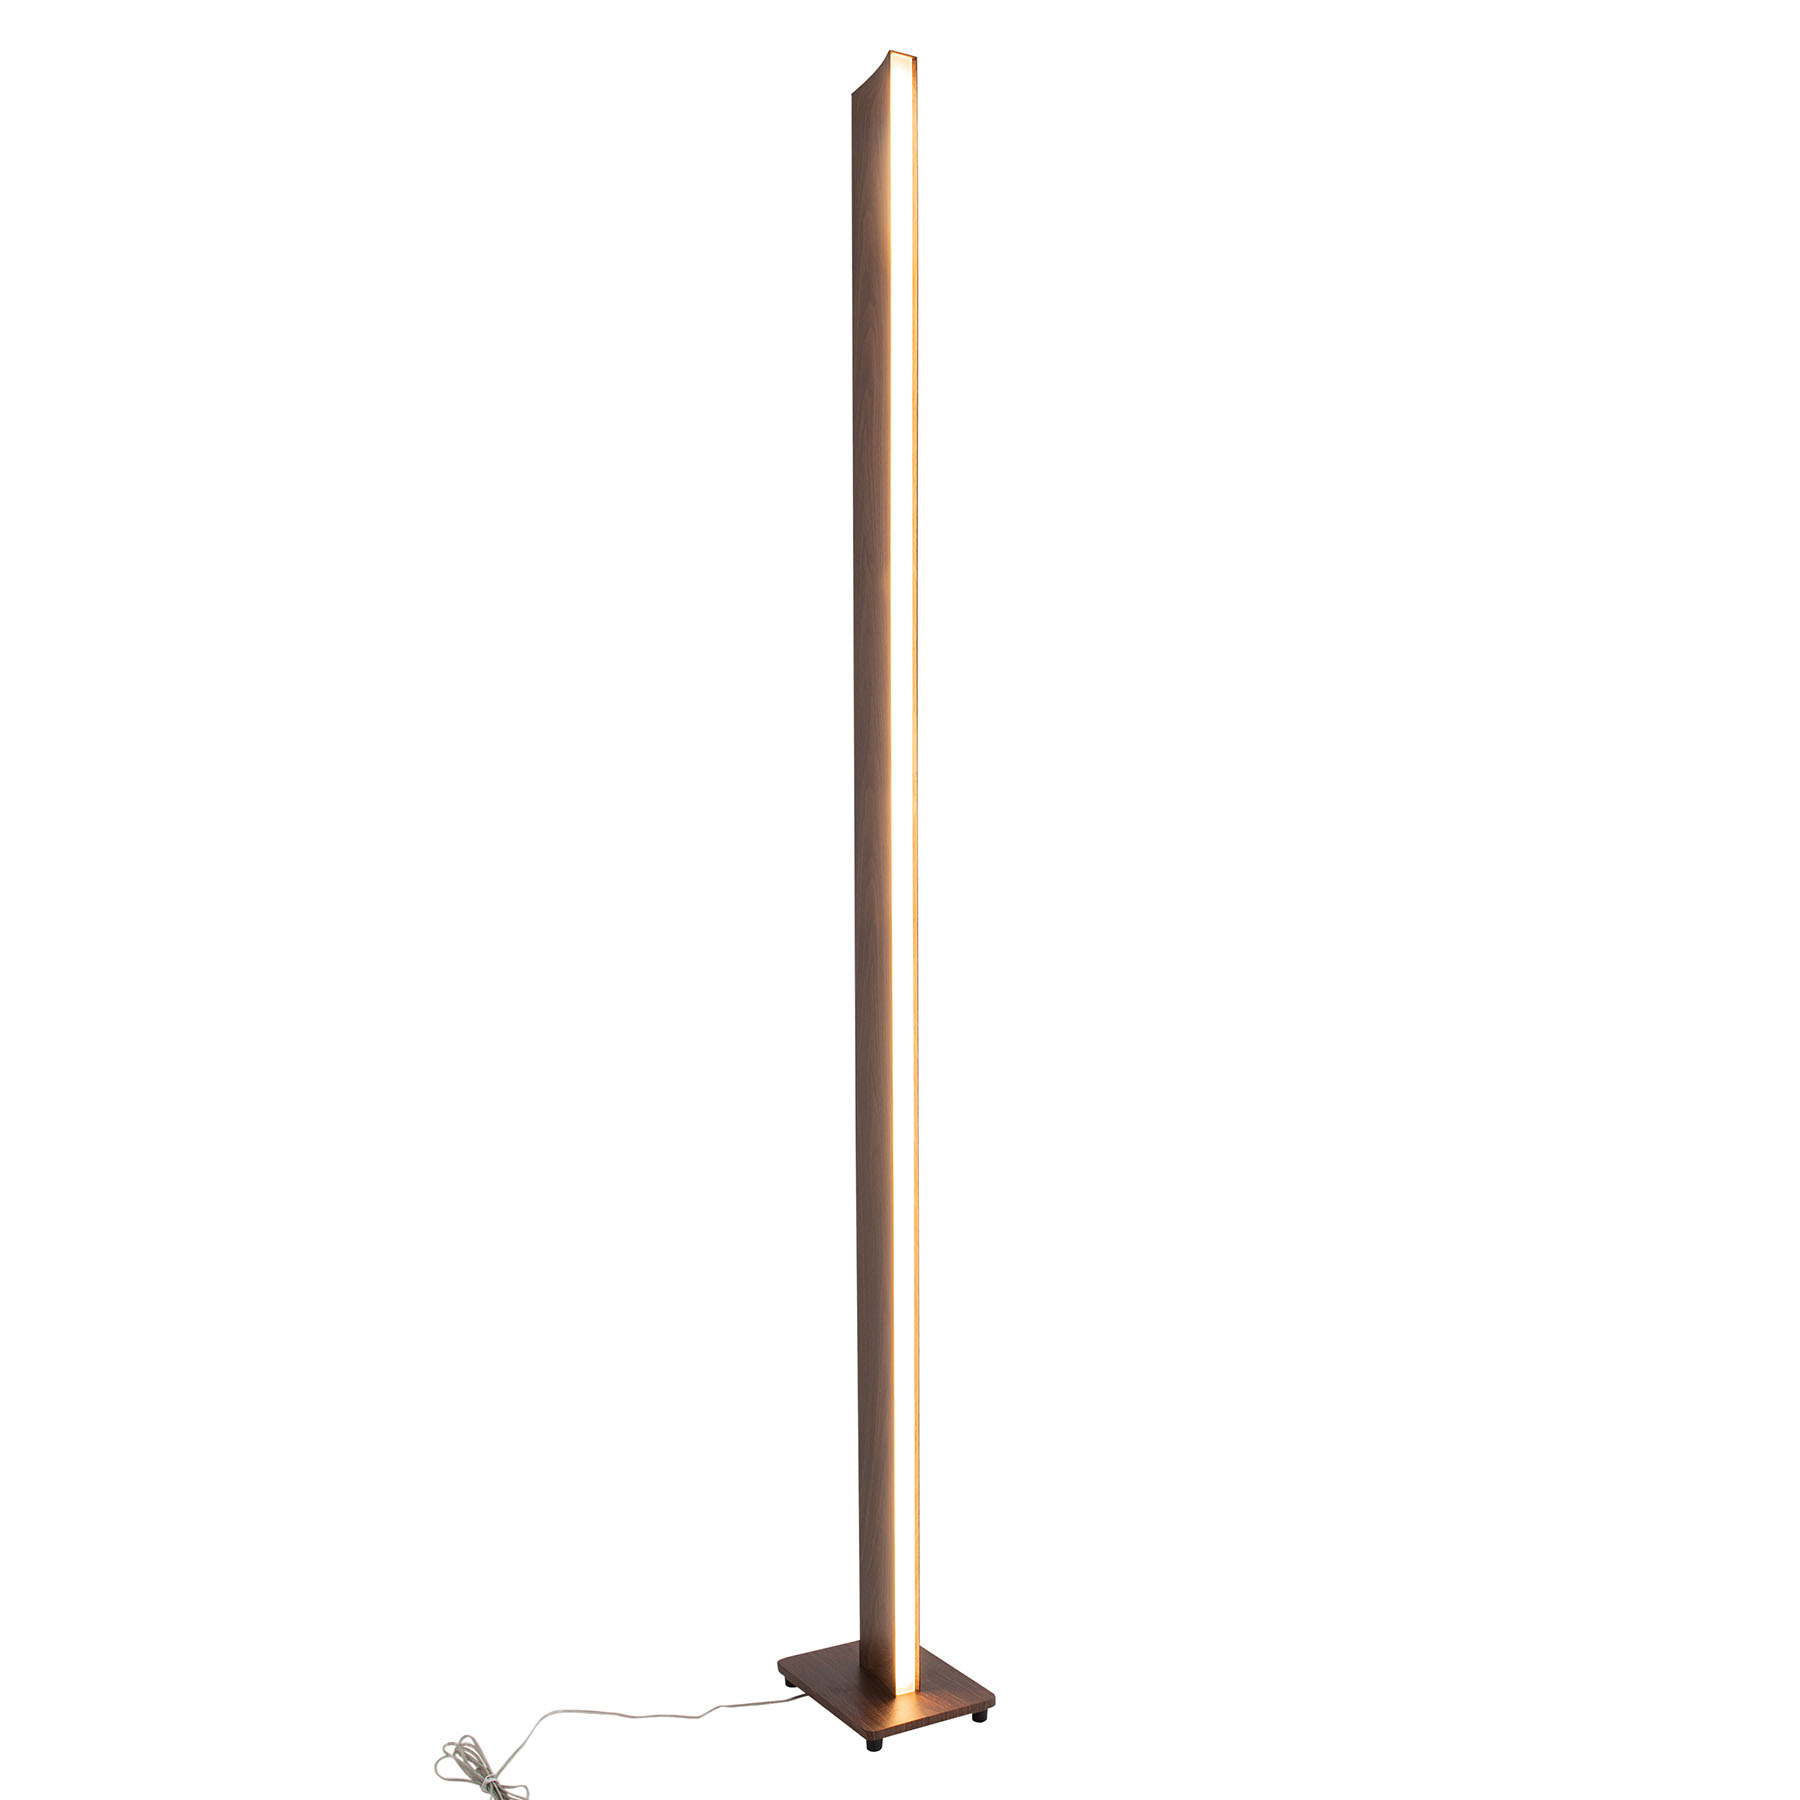 Lampadaire LED Madera aspect bois, dimmable